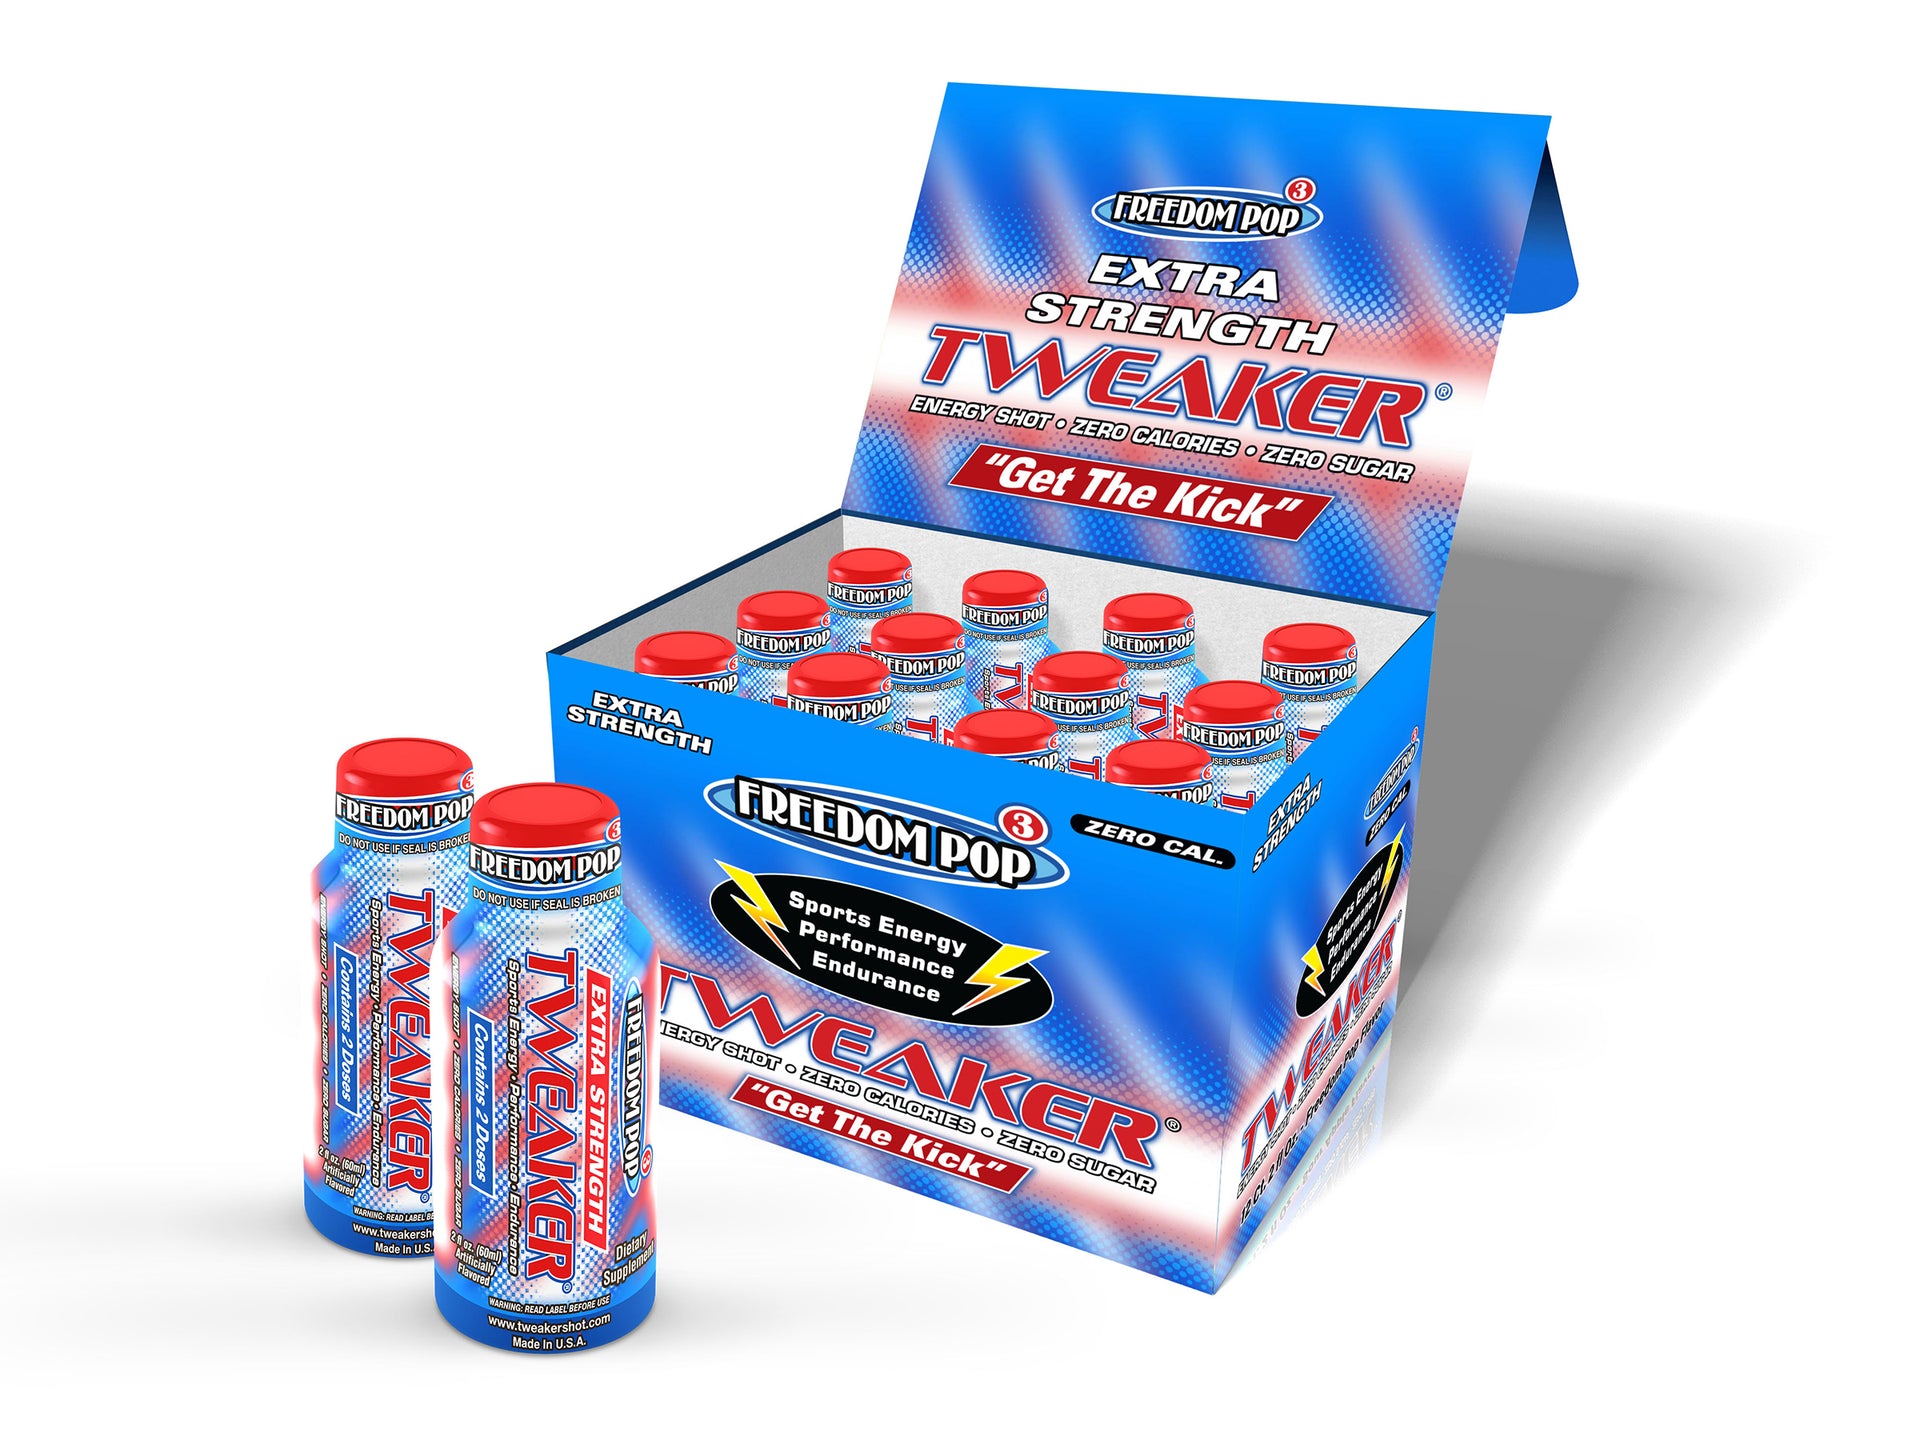 Image shows 12-ct caddy of Extra Strength Tweaker Energy Shot, Freedom Pop flavor